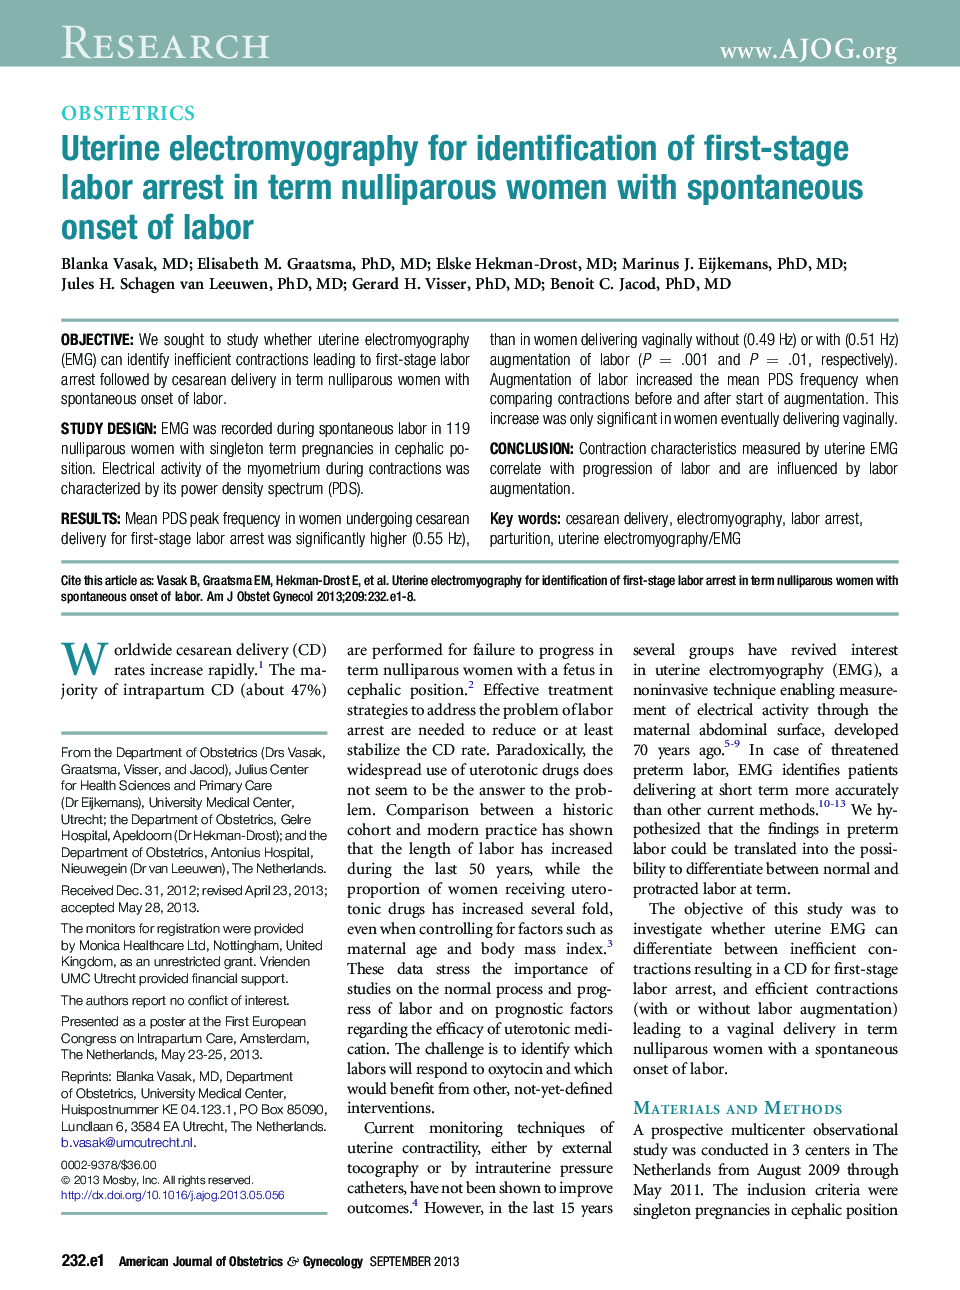 Uterine electromyography for identification of first-stage labor arrest in term nulliparous women with spontaneous onset of labor